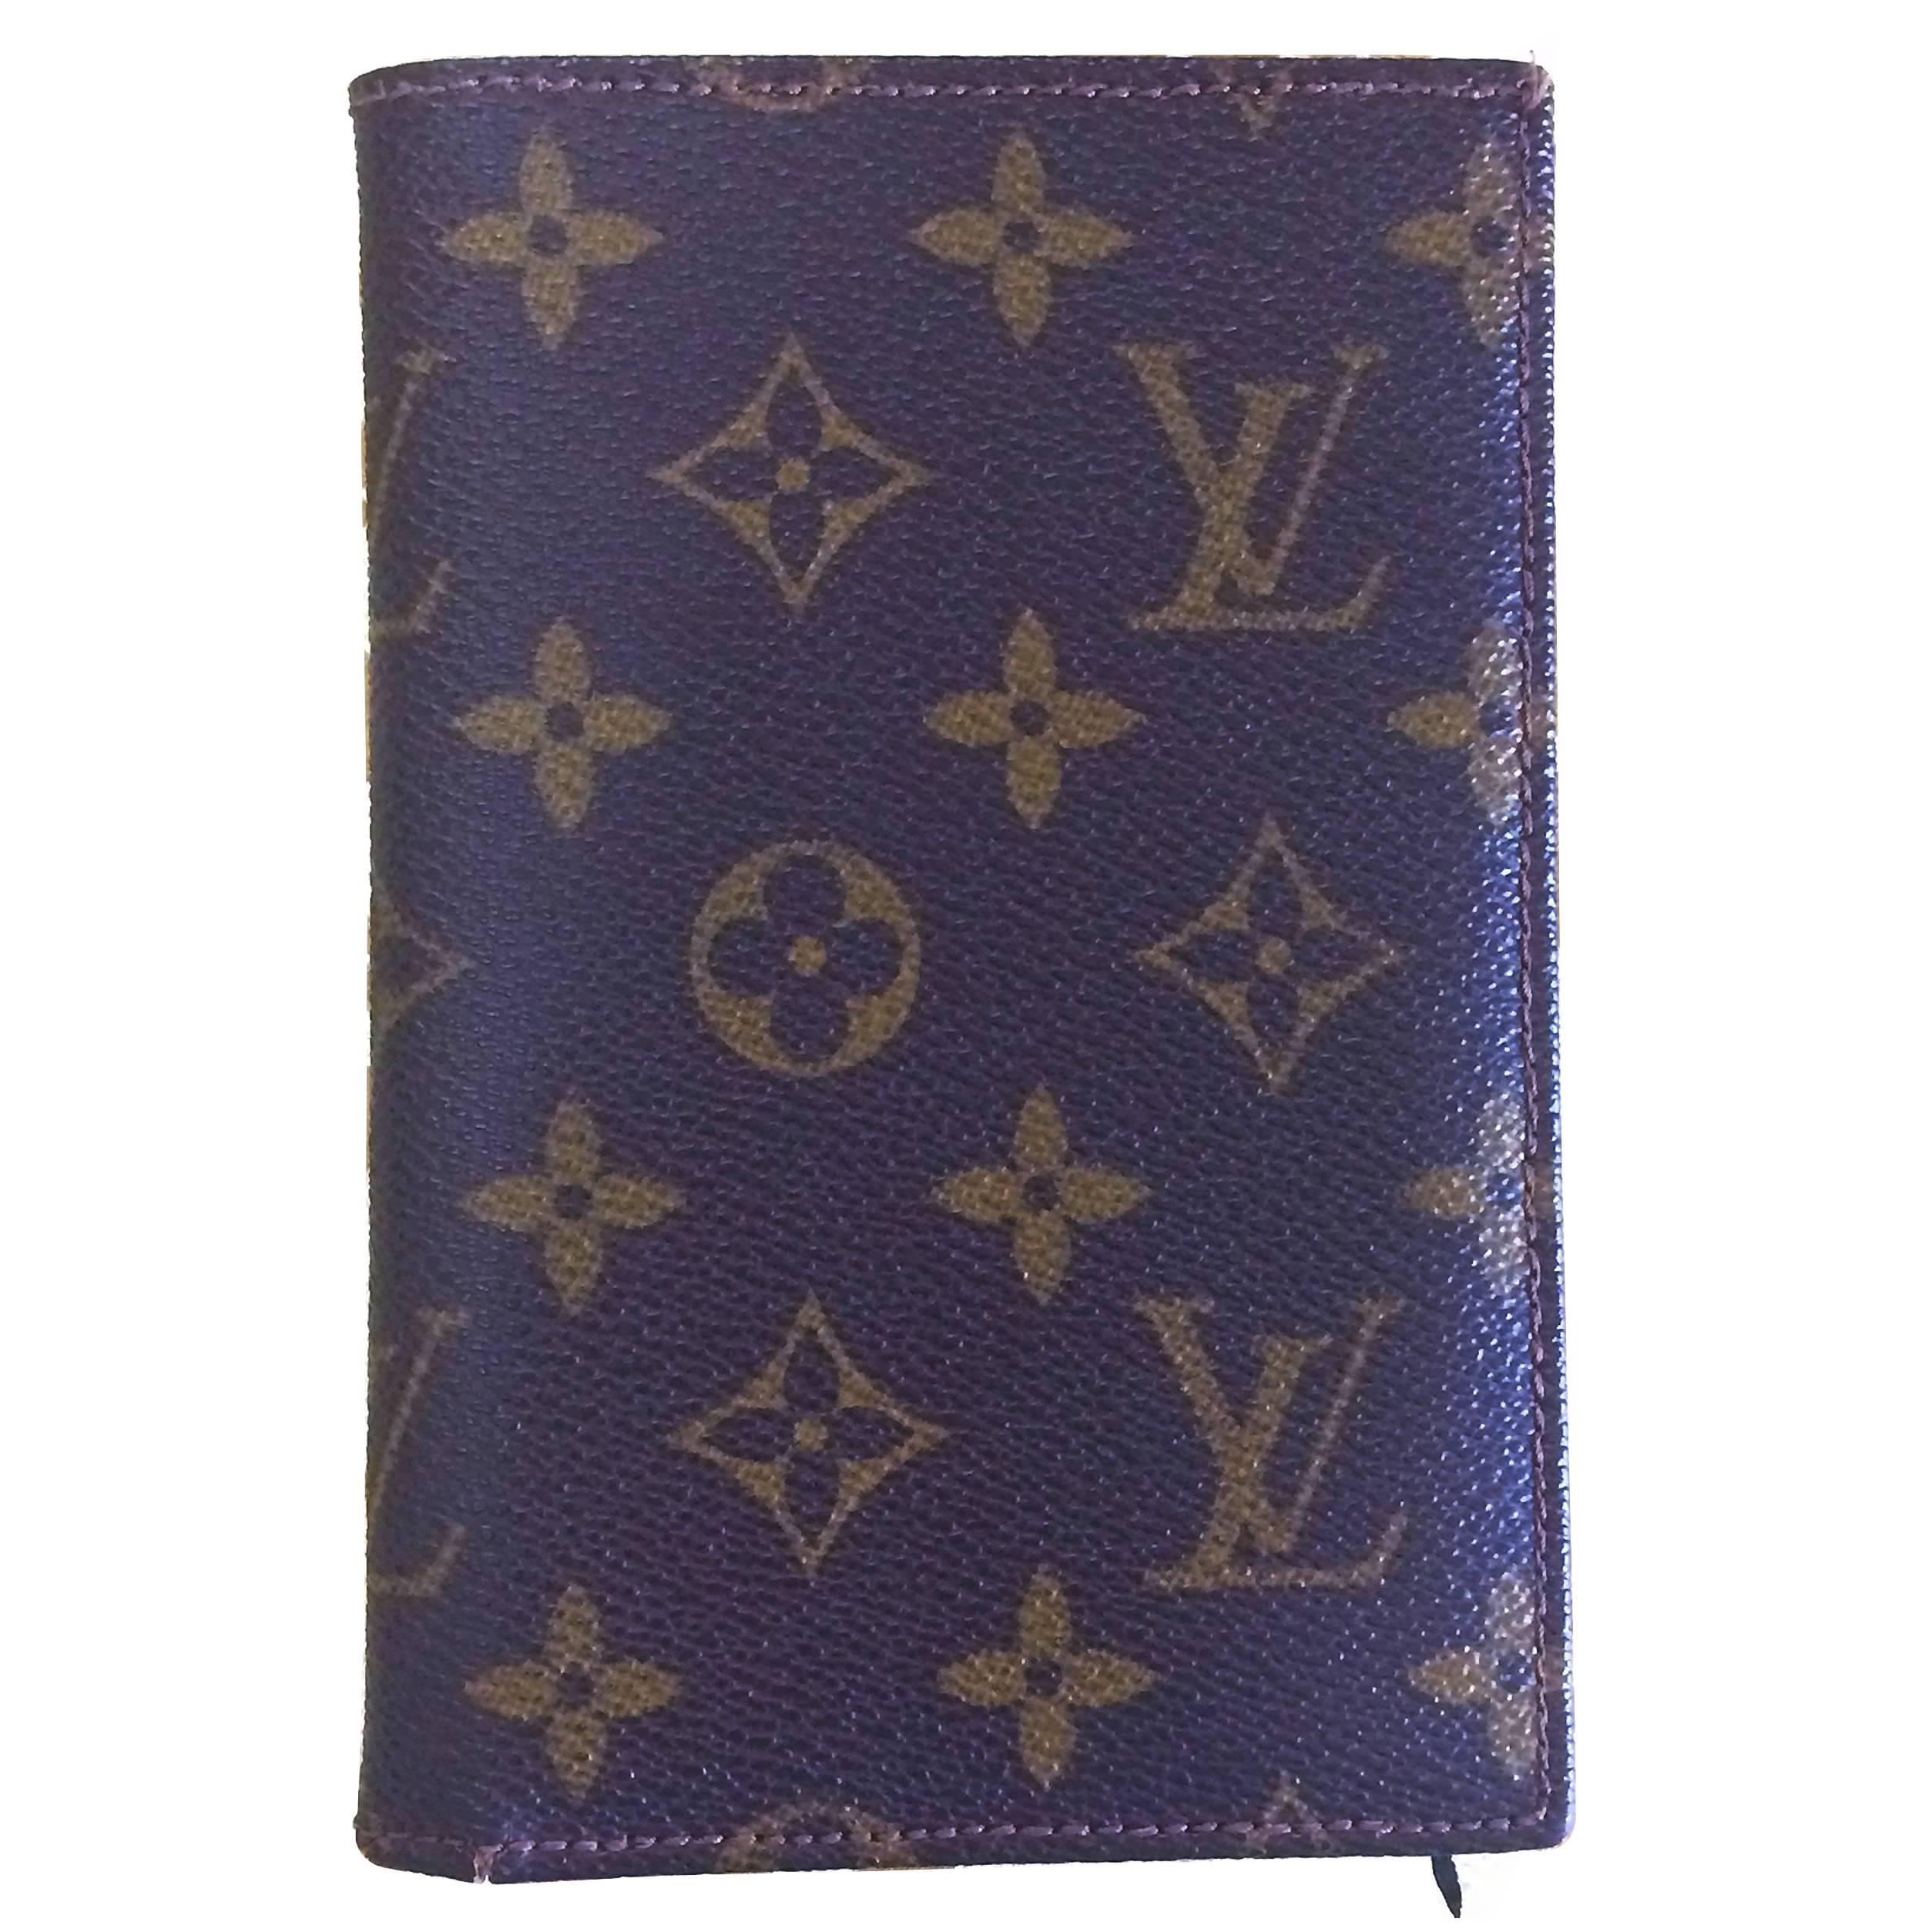 80's vintage Louis Vuitton brown monogram and leather wallet. Classic and unisex